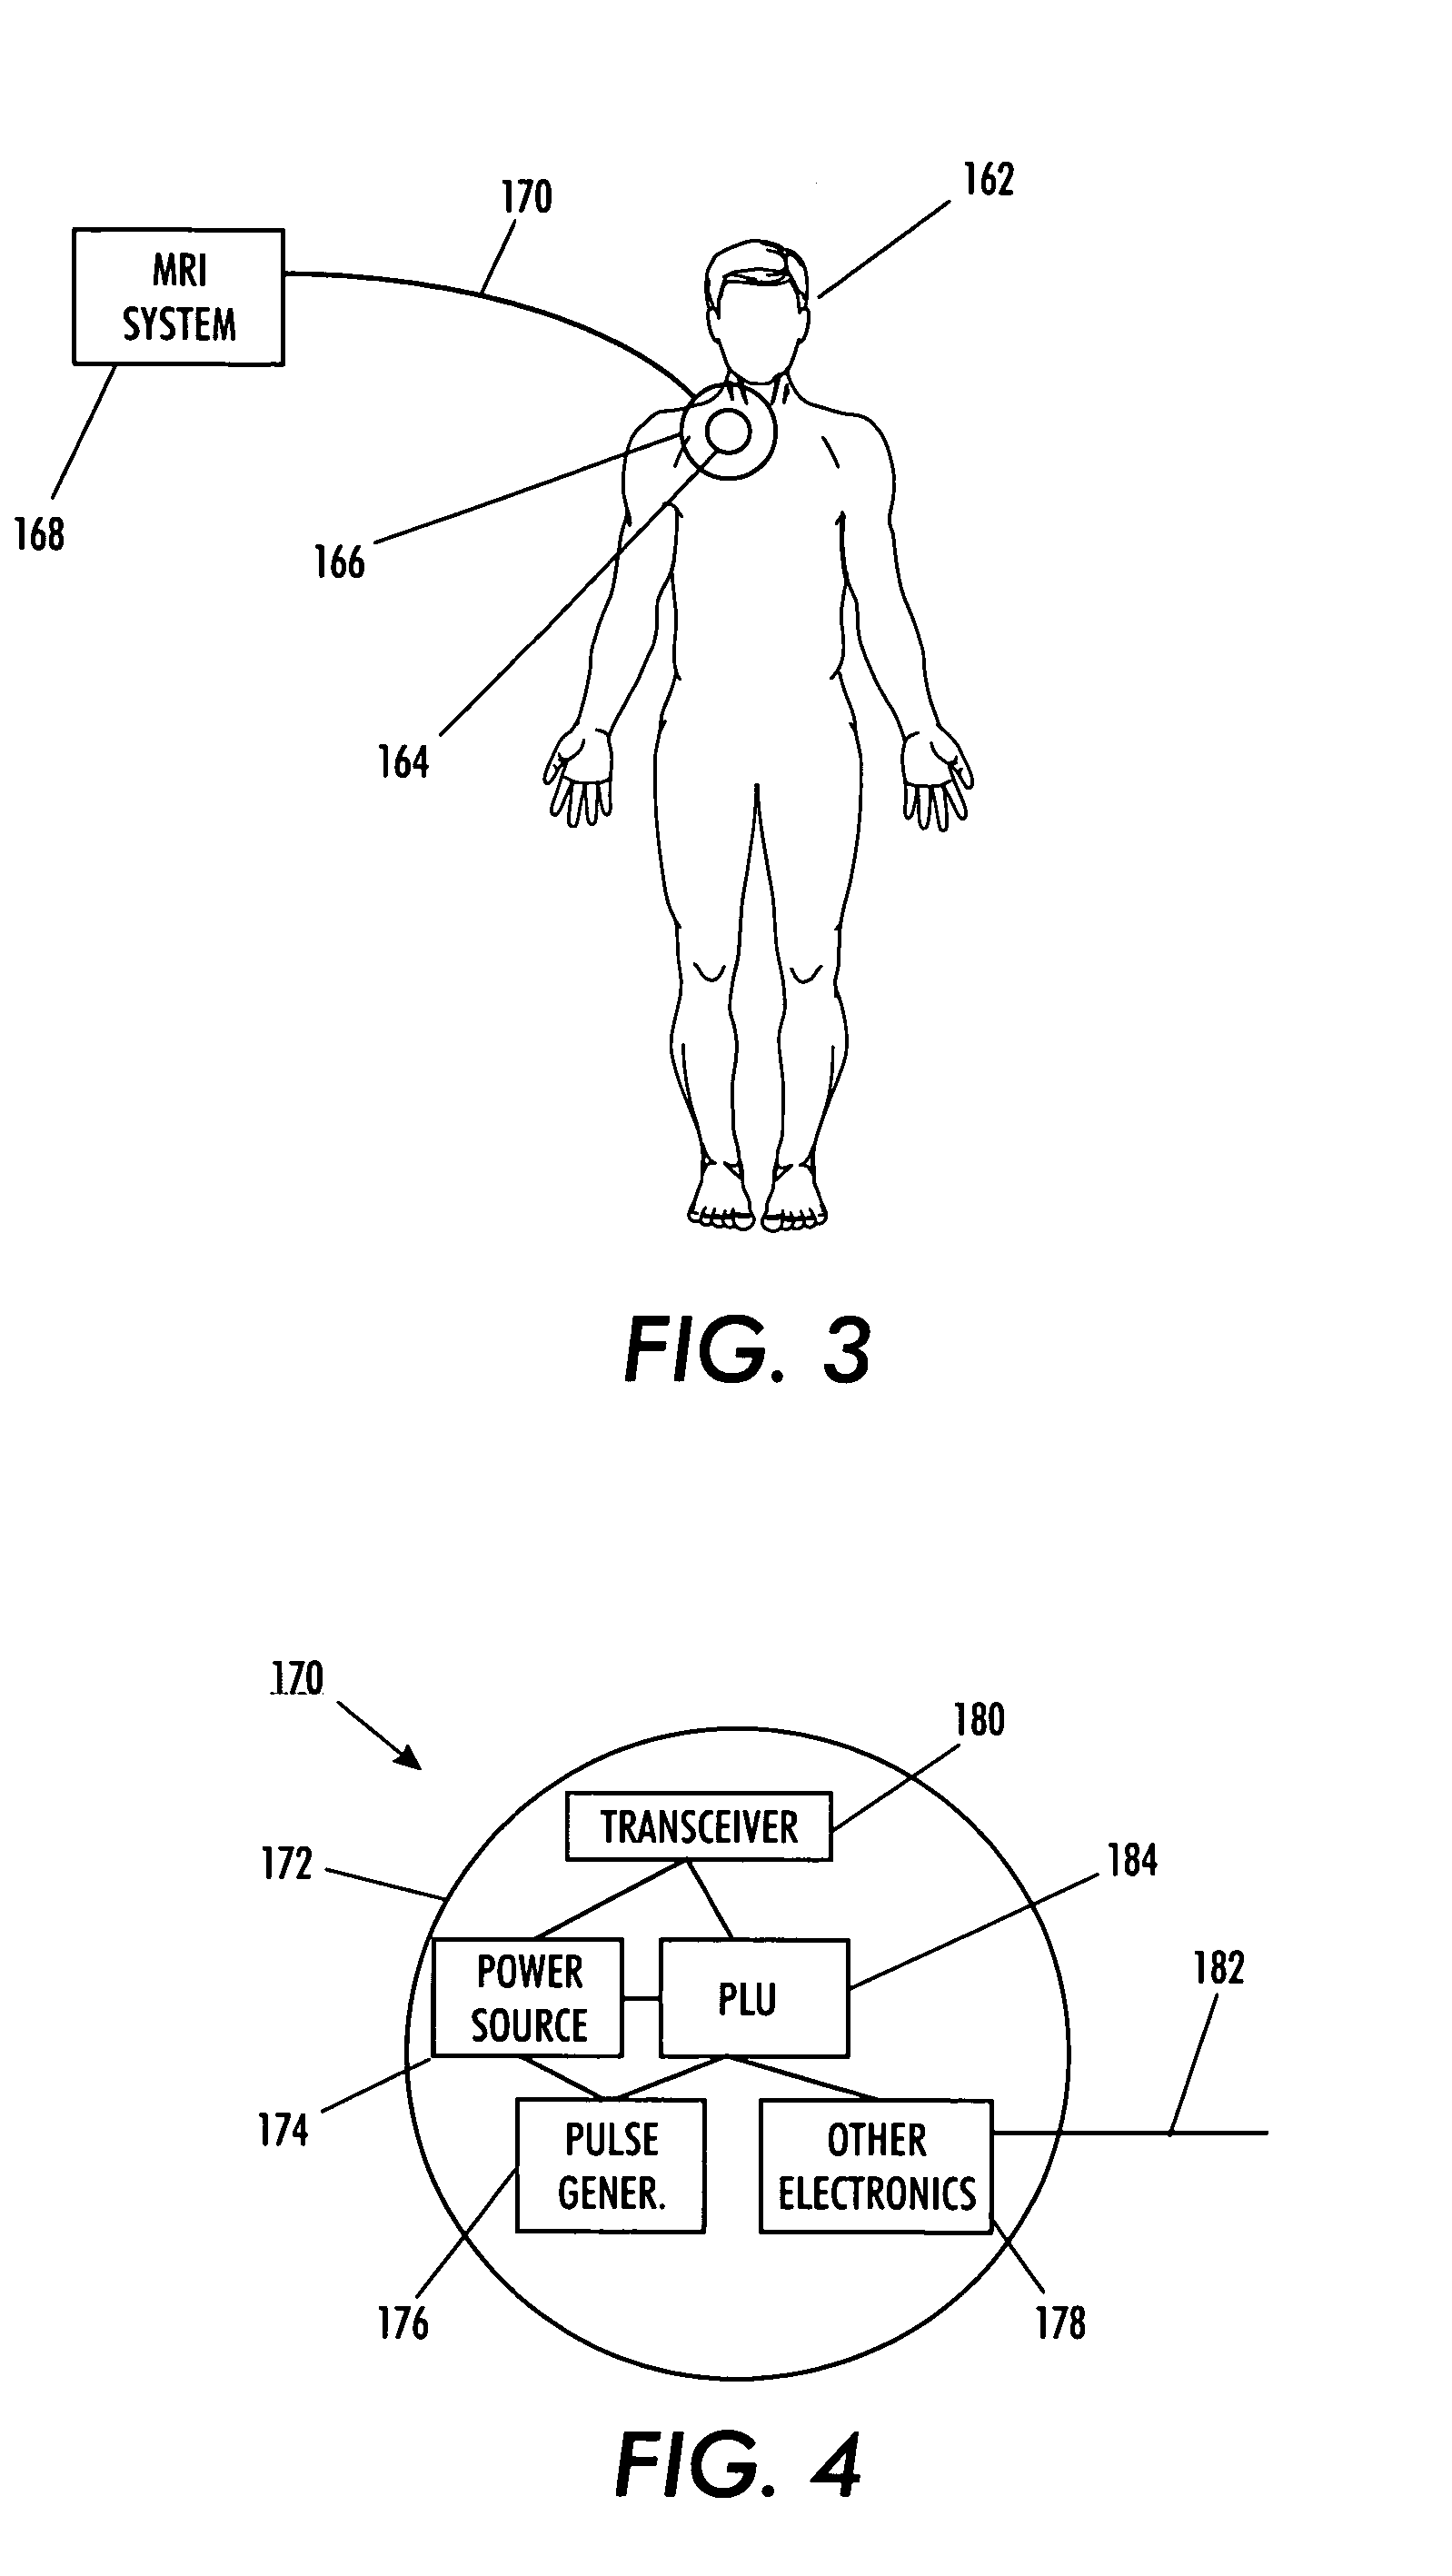 Magnetic resonance imaging interference immune device